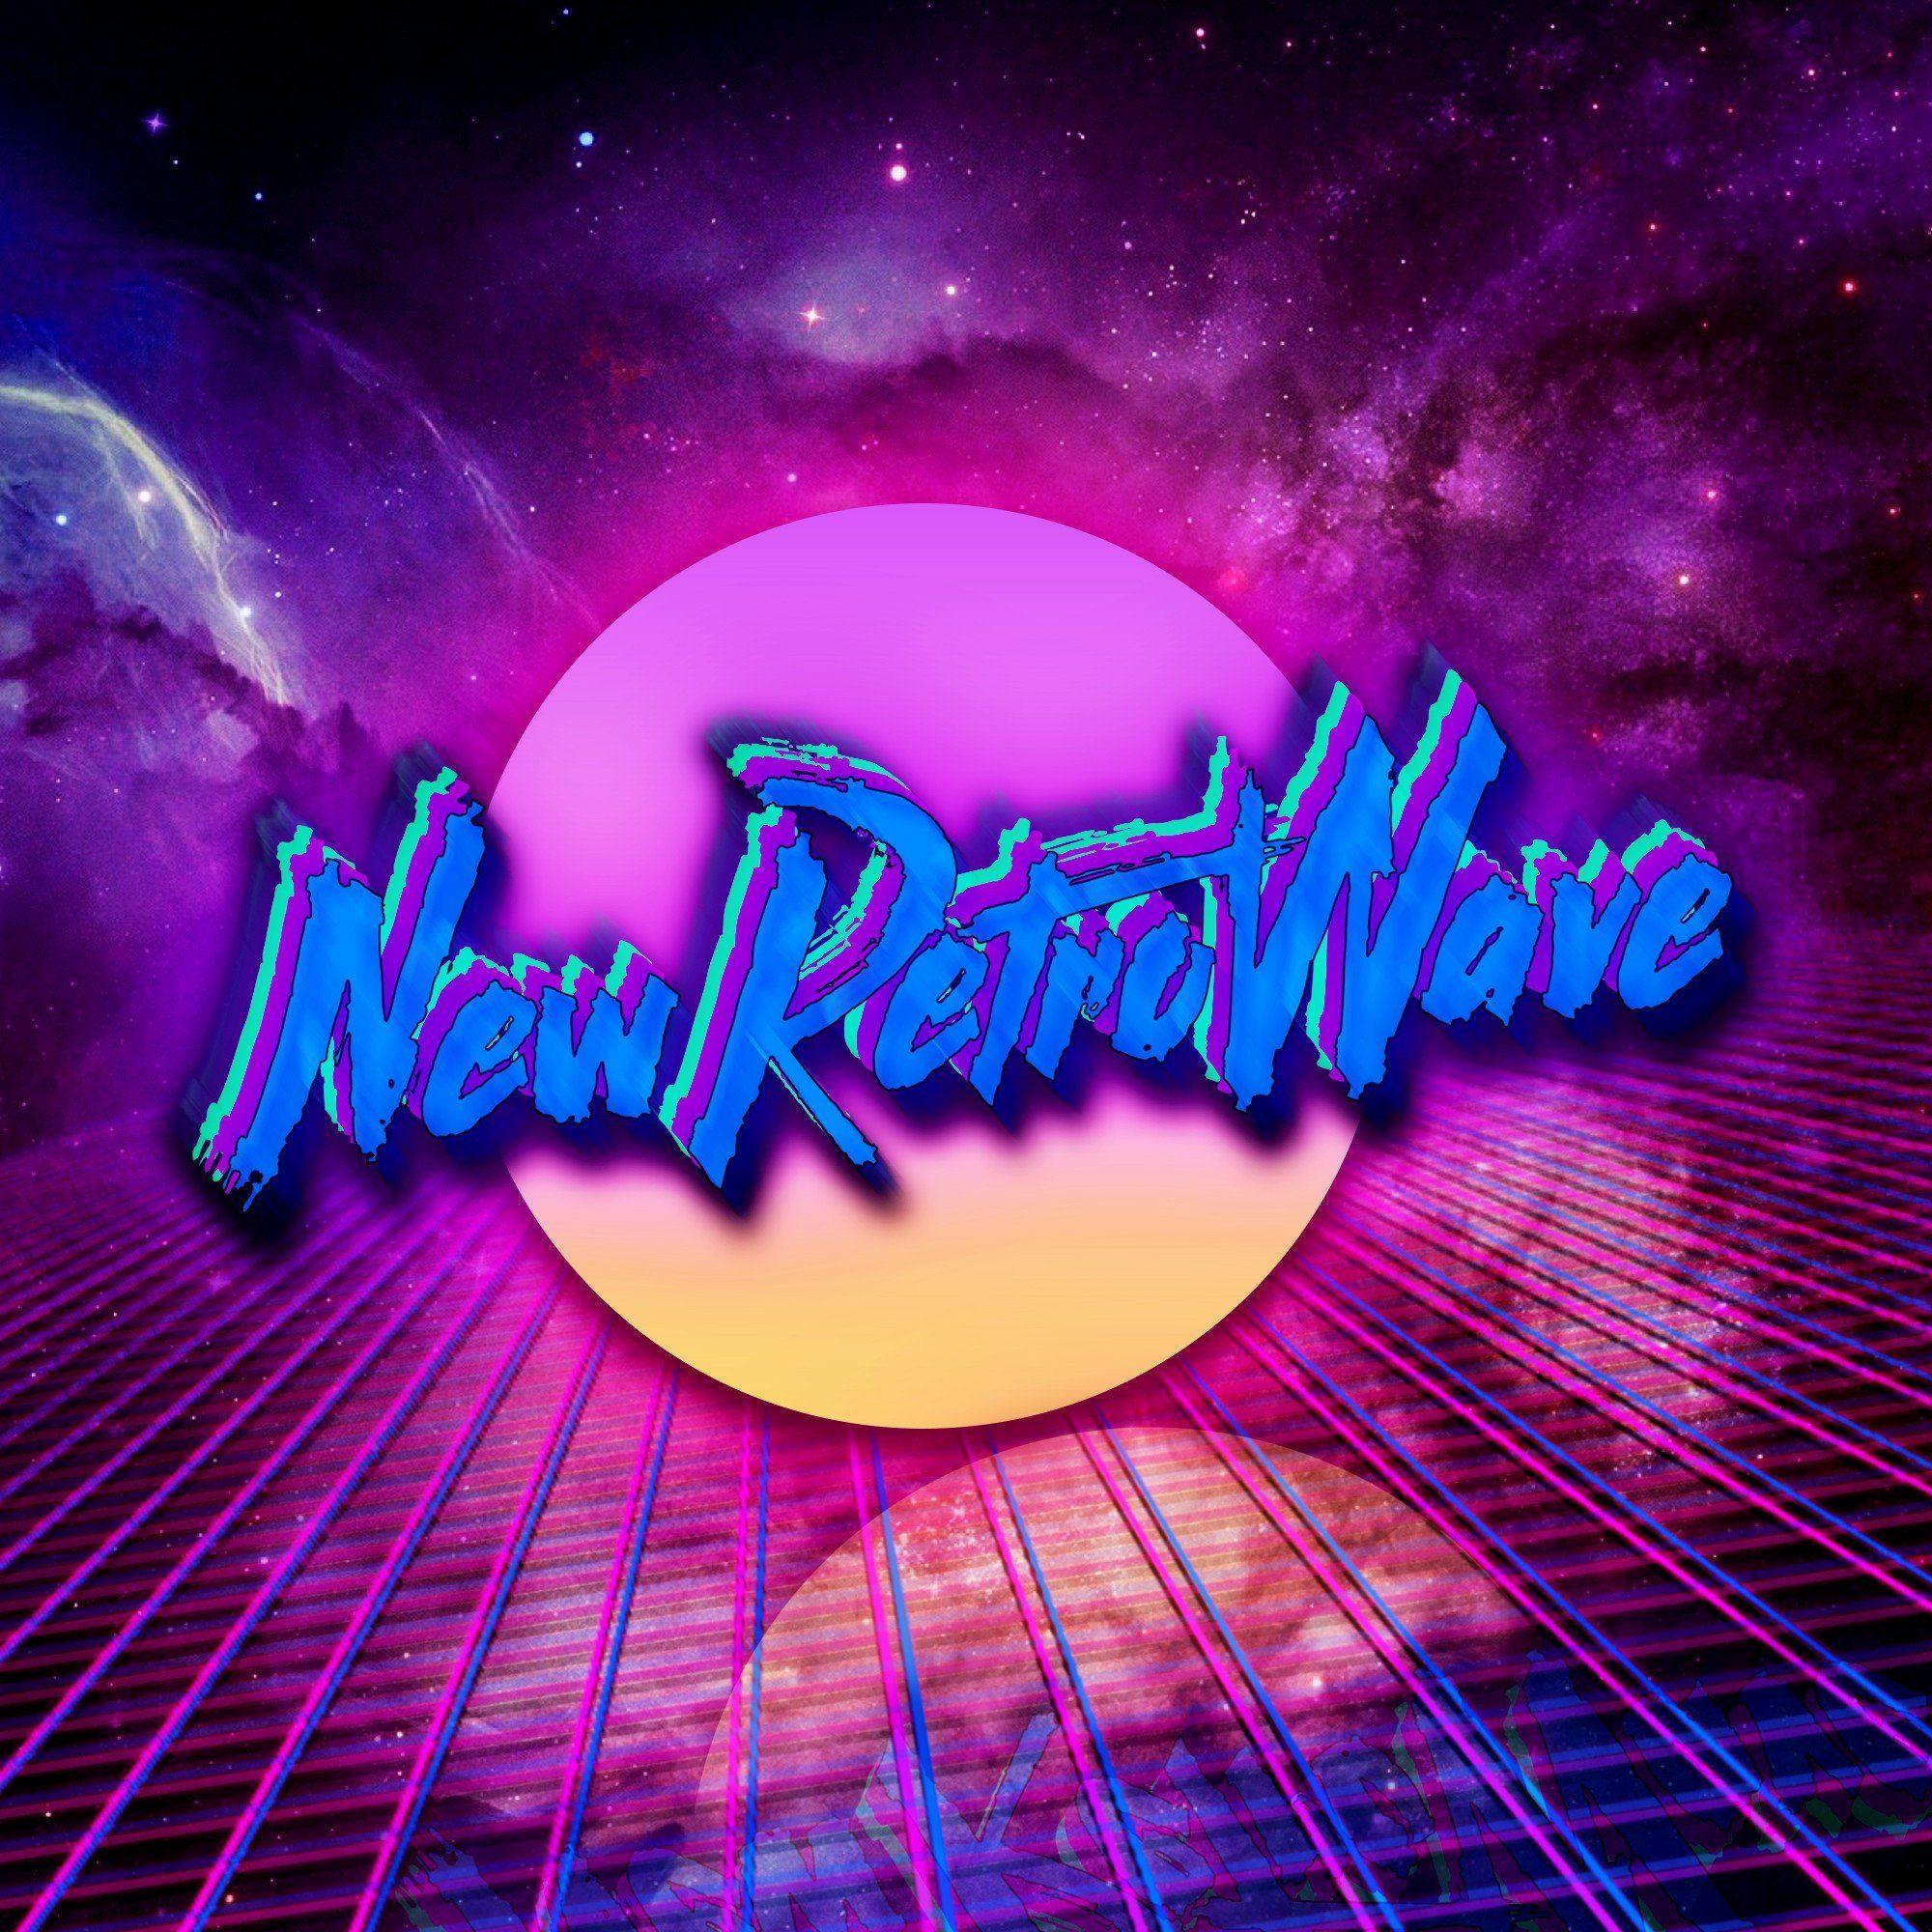 New Retro Wave, Neon, Space, 1980s, Synthwave, Digital art